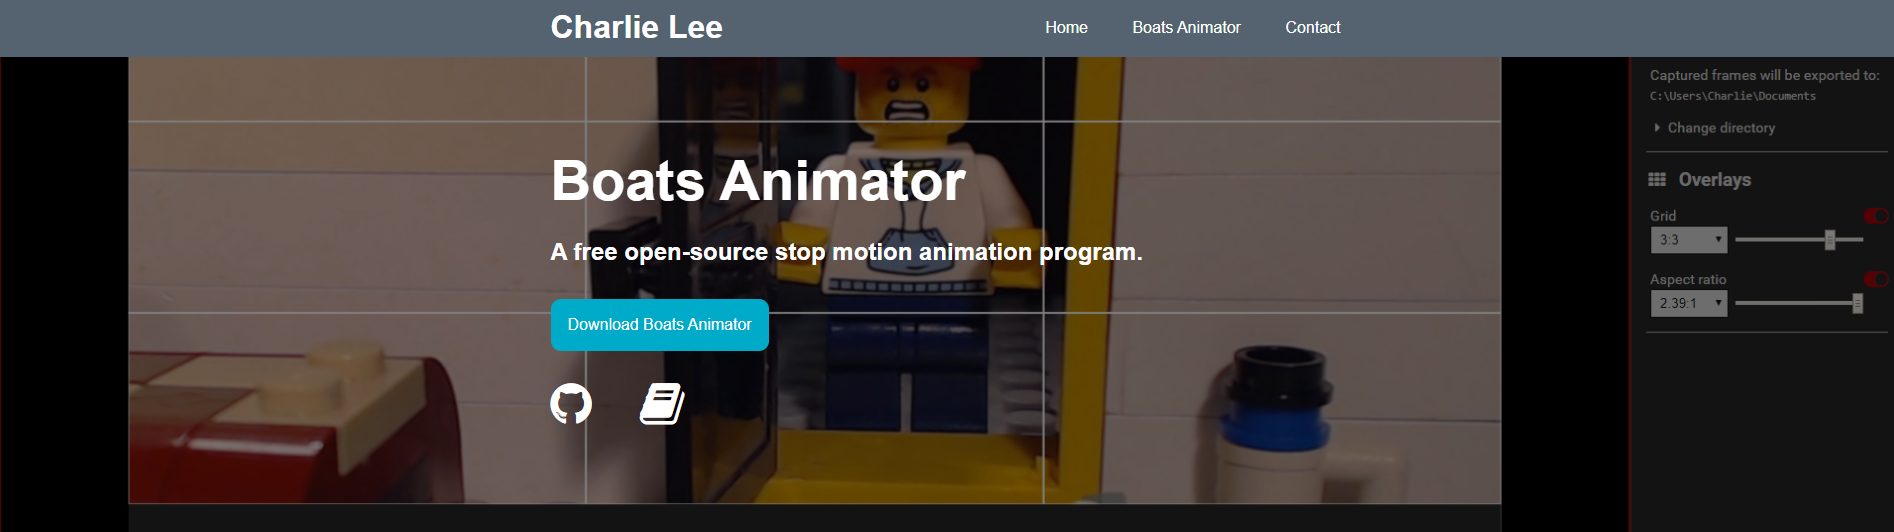 Top 7 Free Animation Software Programs for Your Business